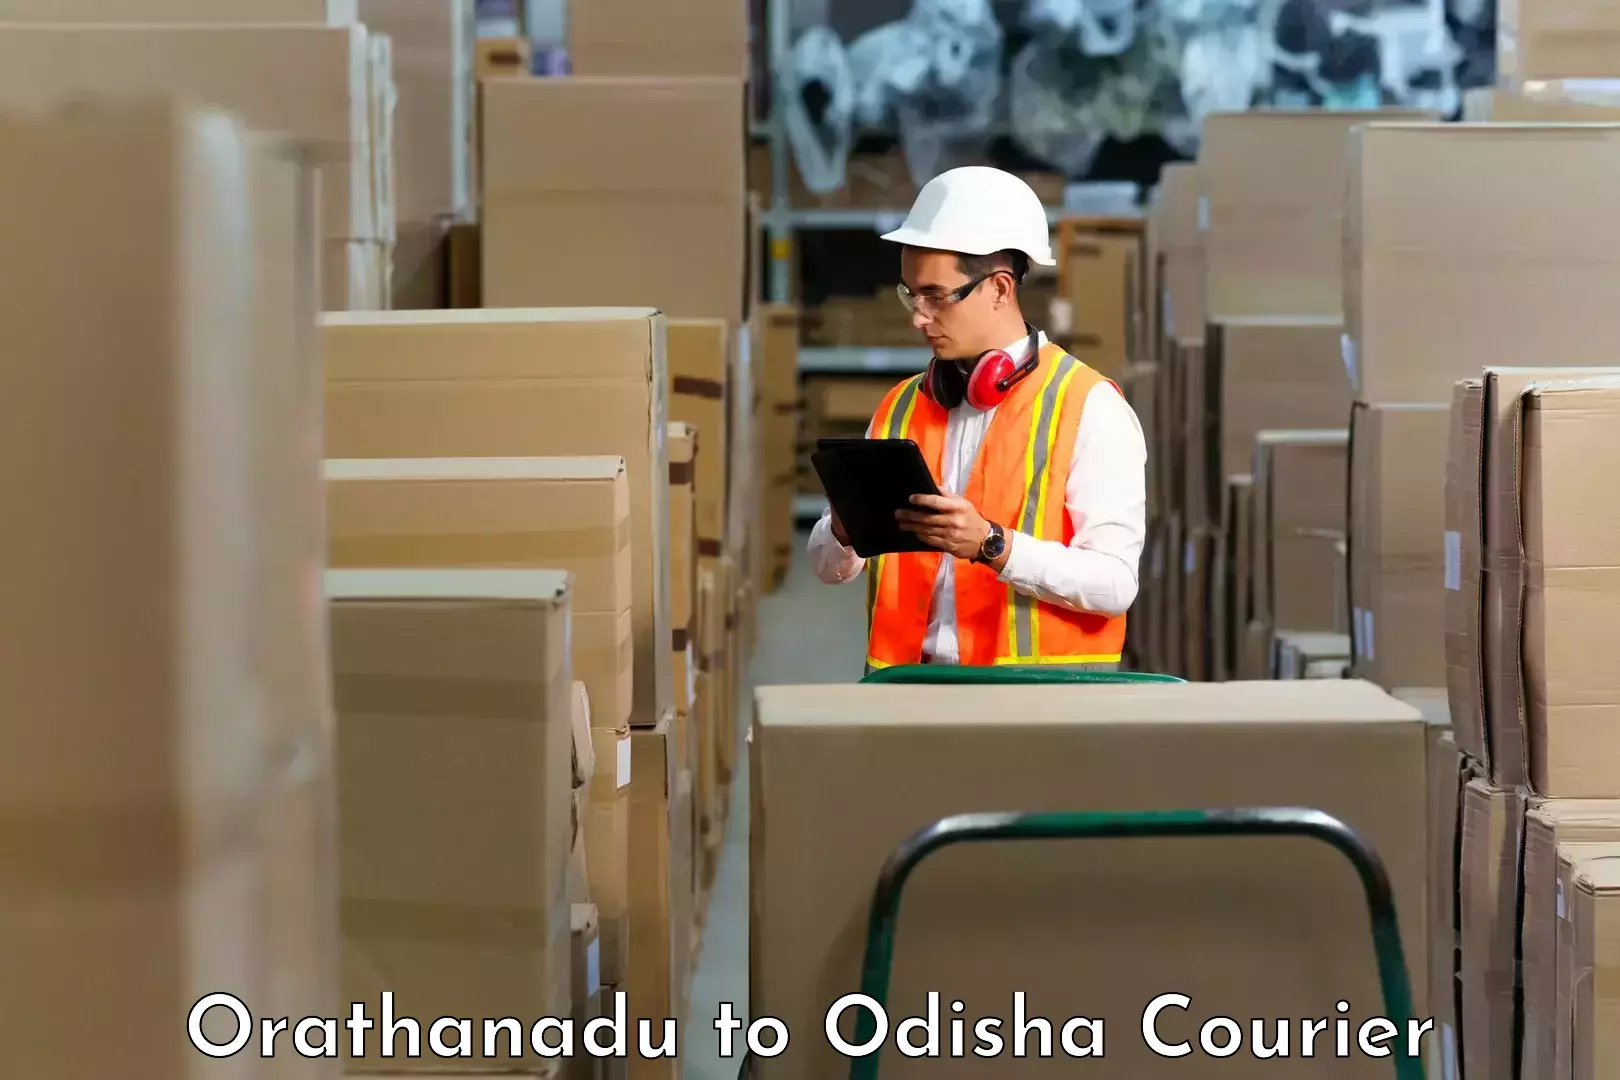 Efficient shipping operations Orathanadu to Kalapathar Cuttack